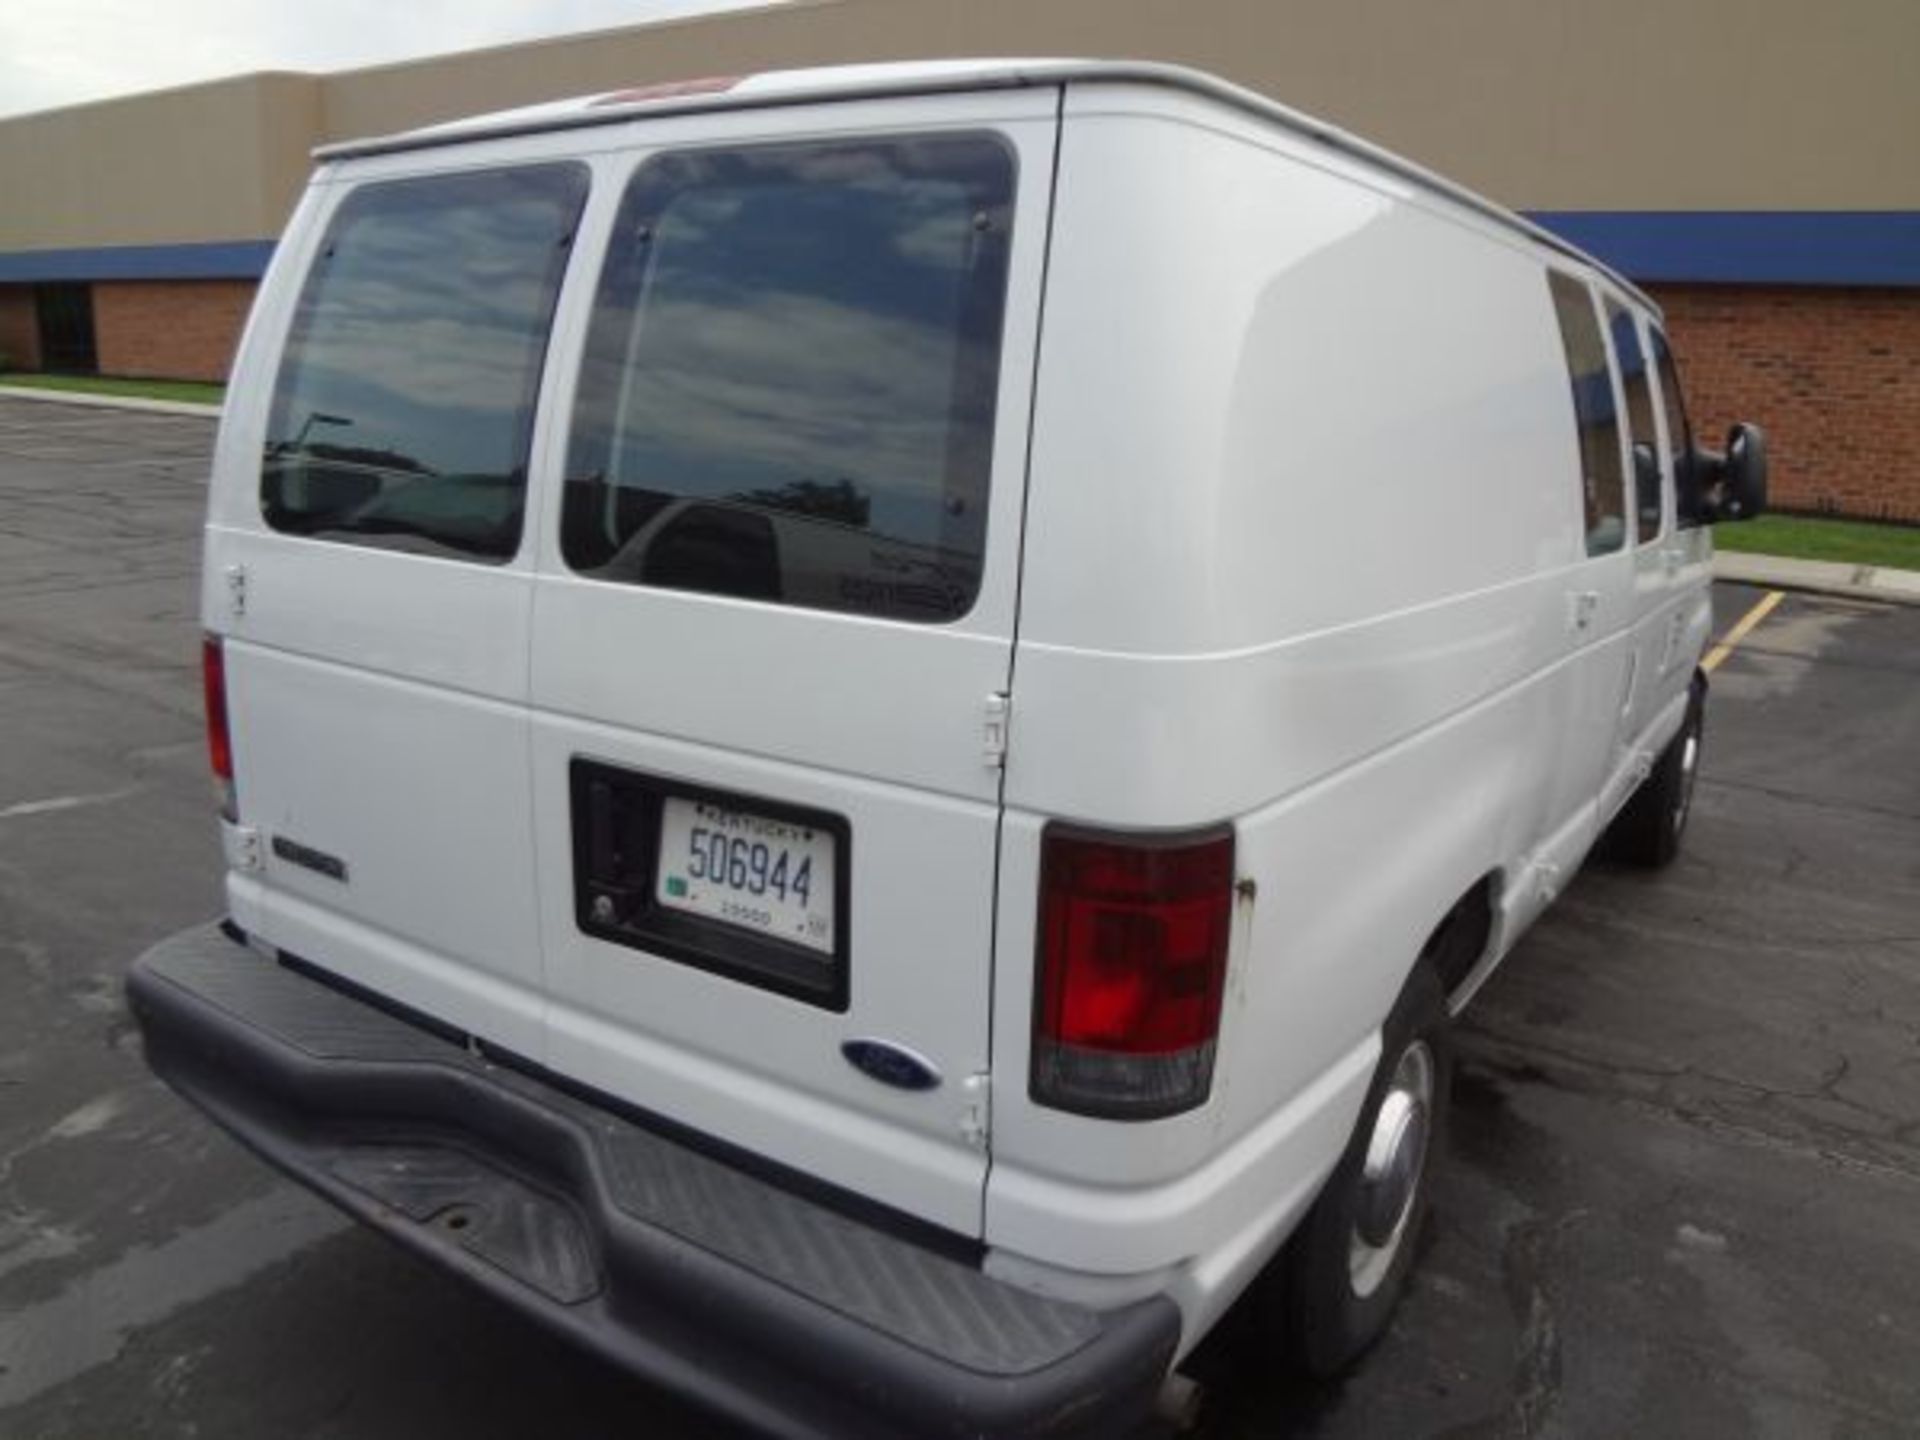 2007 FORD E150 CARGO VAN; VIN # 1FTNE14W770A67161, 4.6 LITER GASOLINE ENGINE, AUTOMATIC - Image 3 of 8